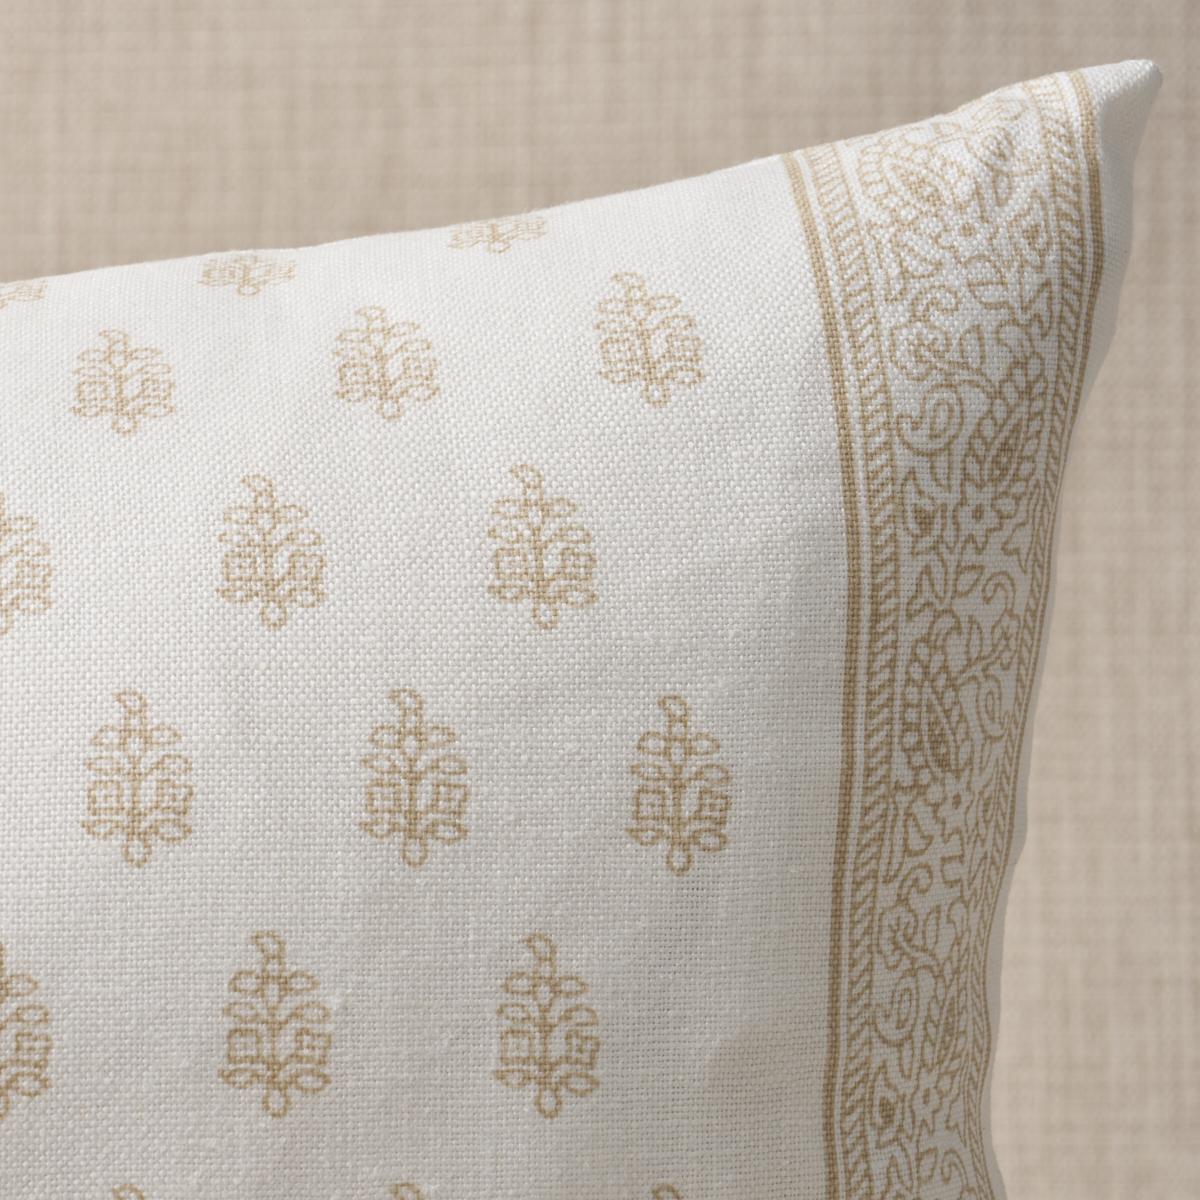 This pillow features Katsura Stripe with a knife edge finish. A delicate, airy design that combines stylized floral elements and intricately detailed stripes, Katsura Stripe is a classic easy-to-use medium-scale fabric that layers beautifully with